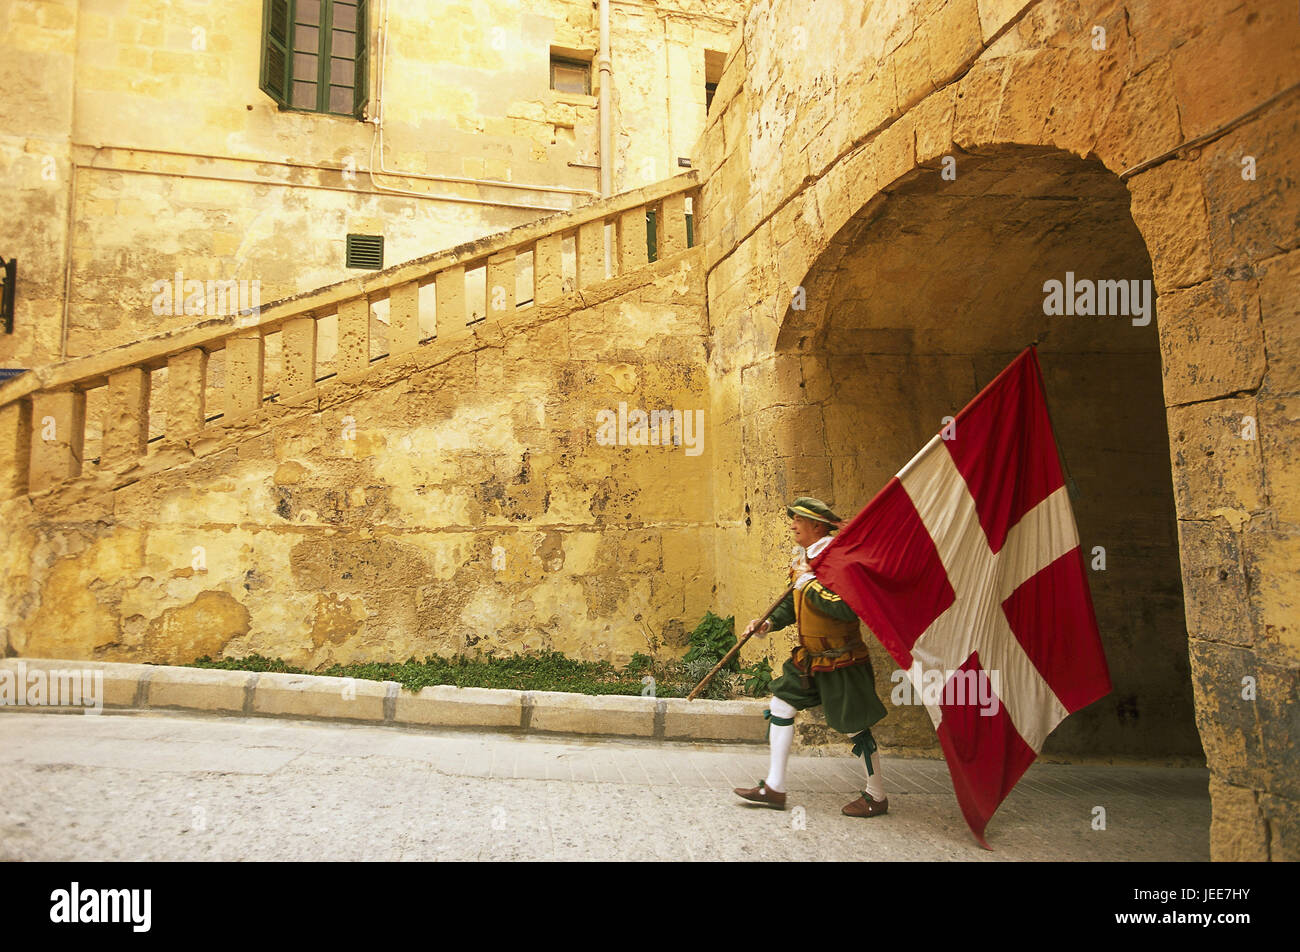 Island Malta, peninsula Sciberras, Valletta, fort piece Elmo, military save, gate, soldier, costume, flag, no model release, Maltese islands, Mediterranean island, capital, culture, UNESCO-world cultural heritage, structure historically, fortress, bastion, showing, show, Guardia save, person, guard soldier, man, Swiss flag, march in, input, tradition, tourism, place of interest, outside, Stock Photo